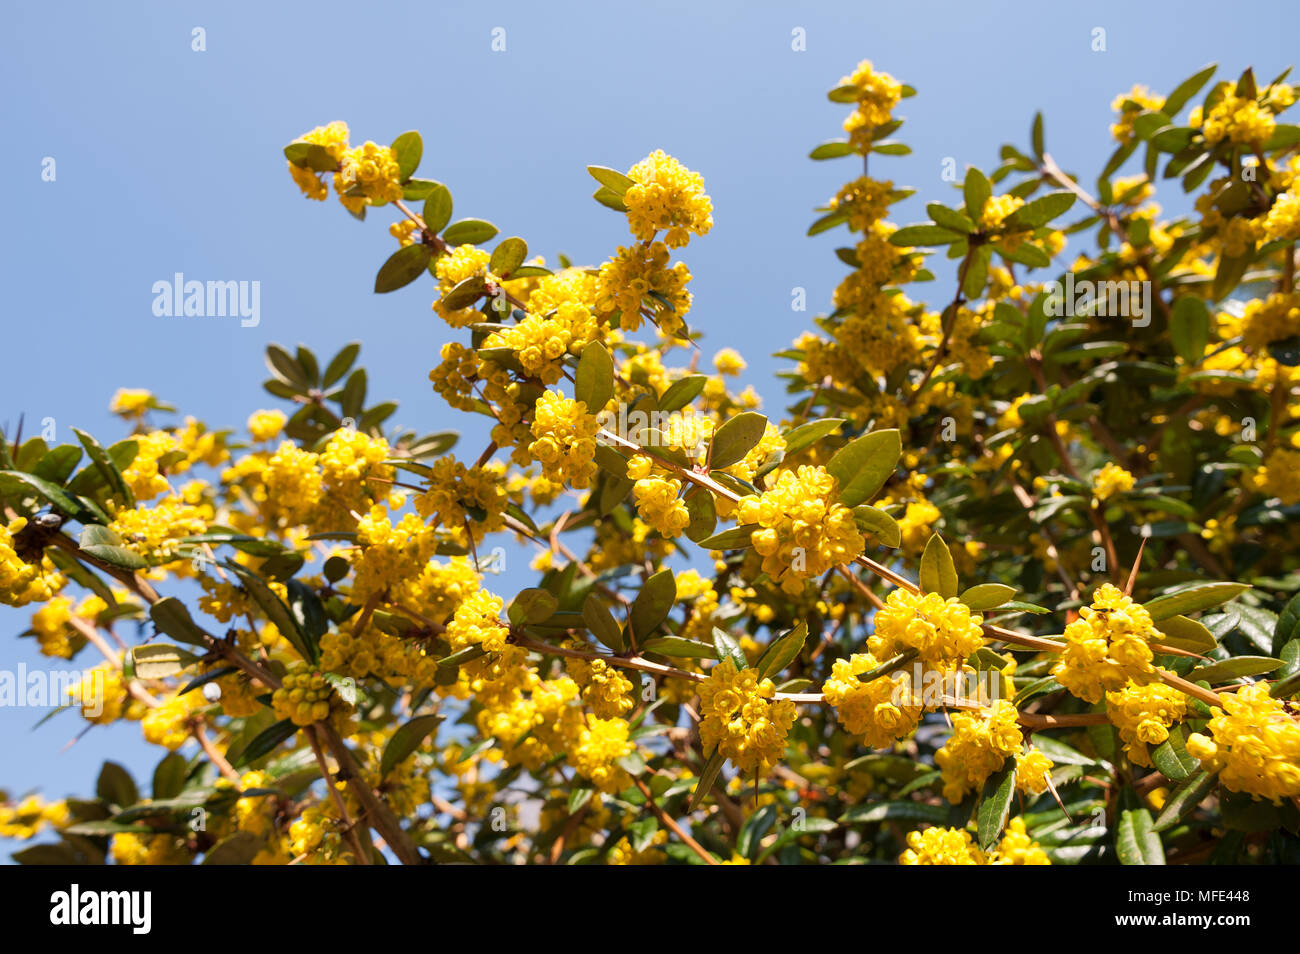 Heavy laden clusters of brilliant mustard yellow axillary flowers of thorny shrub barberry attracting lots of bumble bees with dark green foliage Stock Photo